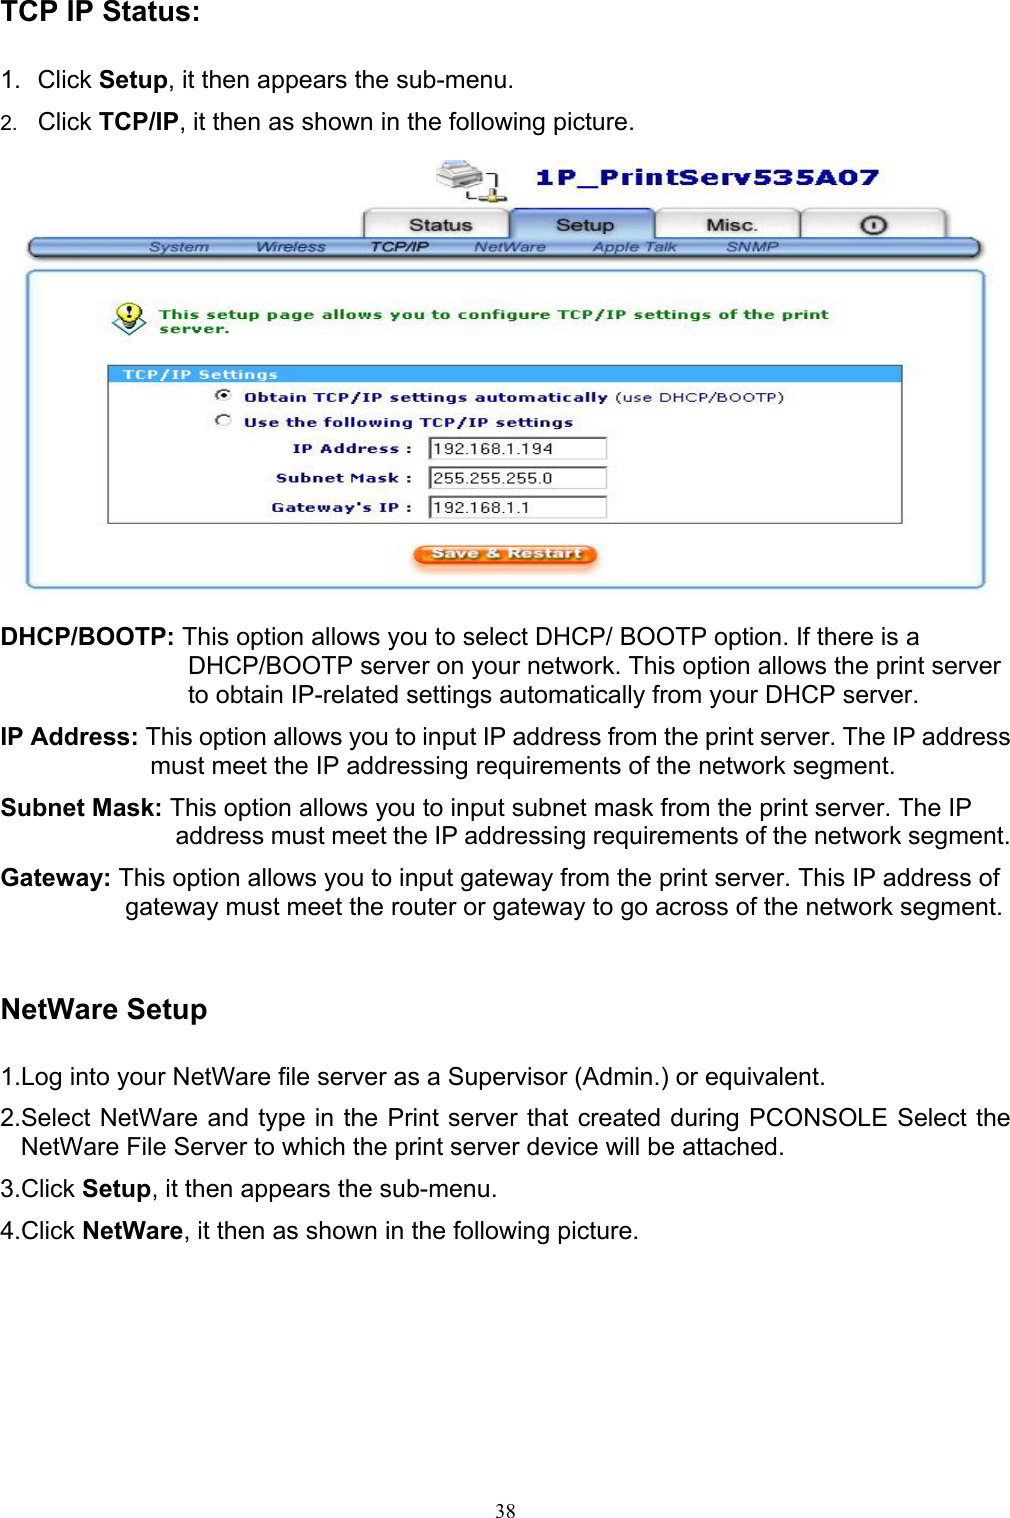   38TCP IP Status:  1. Click Setup, it then appears the sub-menu. 2.  Click TCP/IP, it then as shown in the following picture.    DHCP/BOOTP: This option allows you to select DHCP/ BOOTP option. If there is a DHCP/BOOTP server on your network. This option allows the print server to obtain IP-related settings automatically from your DHCP server. IP Address: This option allows you to input IP address from the print server. The IP address must meet the IP addressing requirements of the network segment. Subnet Mask: This option allows you to input subnet mask from the print server. The IP address must meet the IP addressing requirements of the network segment. Gateway: This option allows you to input gateway from the print server. This IP address of gateway must meet the router or gateway to go across of the network segment.   NetWare Setup  1.Log into your NetWare file server as a Supervisor (Admin.) or equivalent. 2.Select NetWare and type in the Print server that created during PCONSOLE Select the NetWare File Server to which the print server device will be attached. 3.Click Setup, it then appears the sub-menu.  4.Click NetWare, it then as shown in the following picture.  